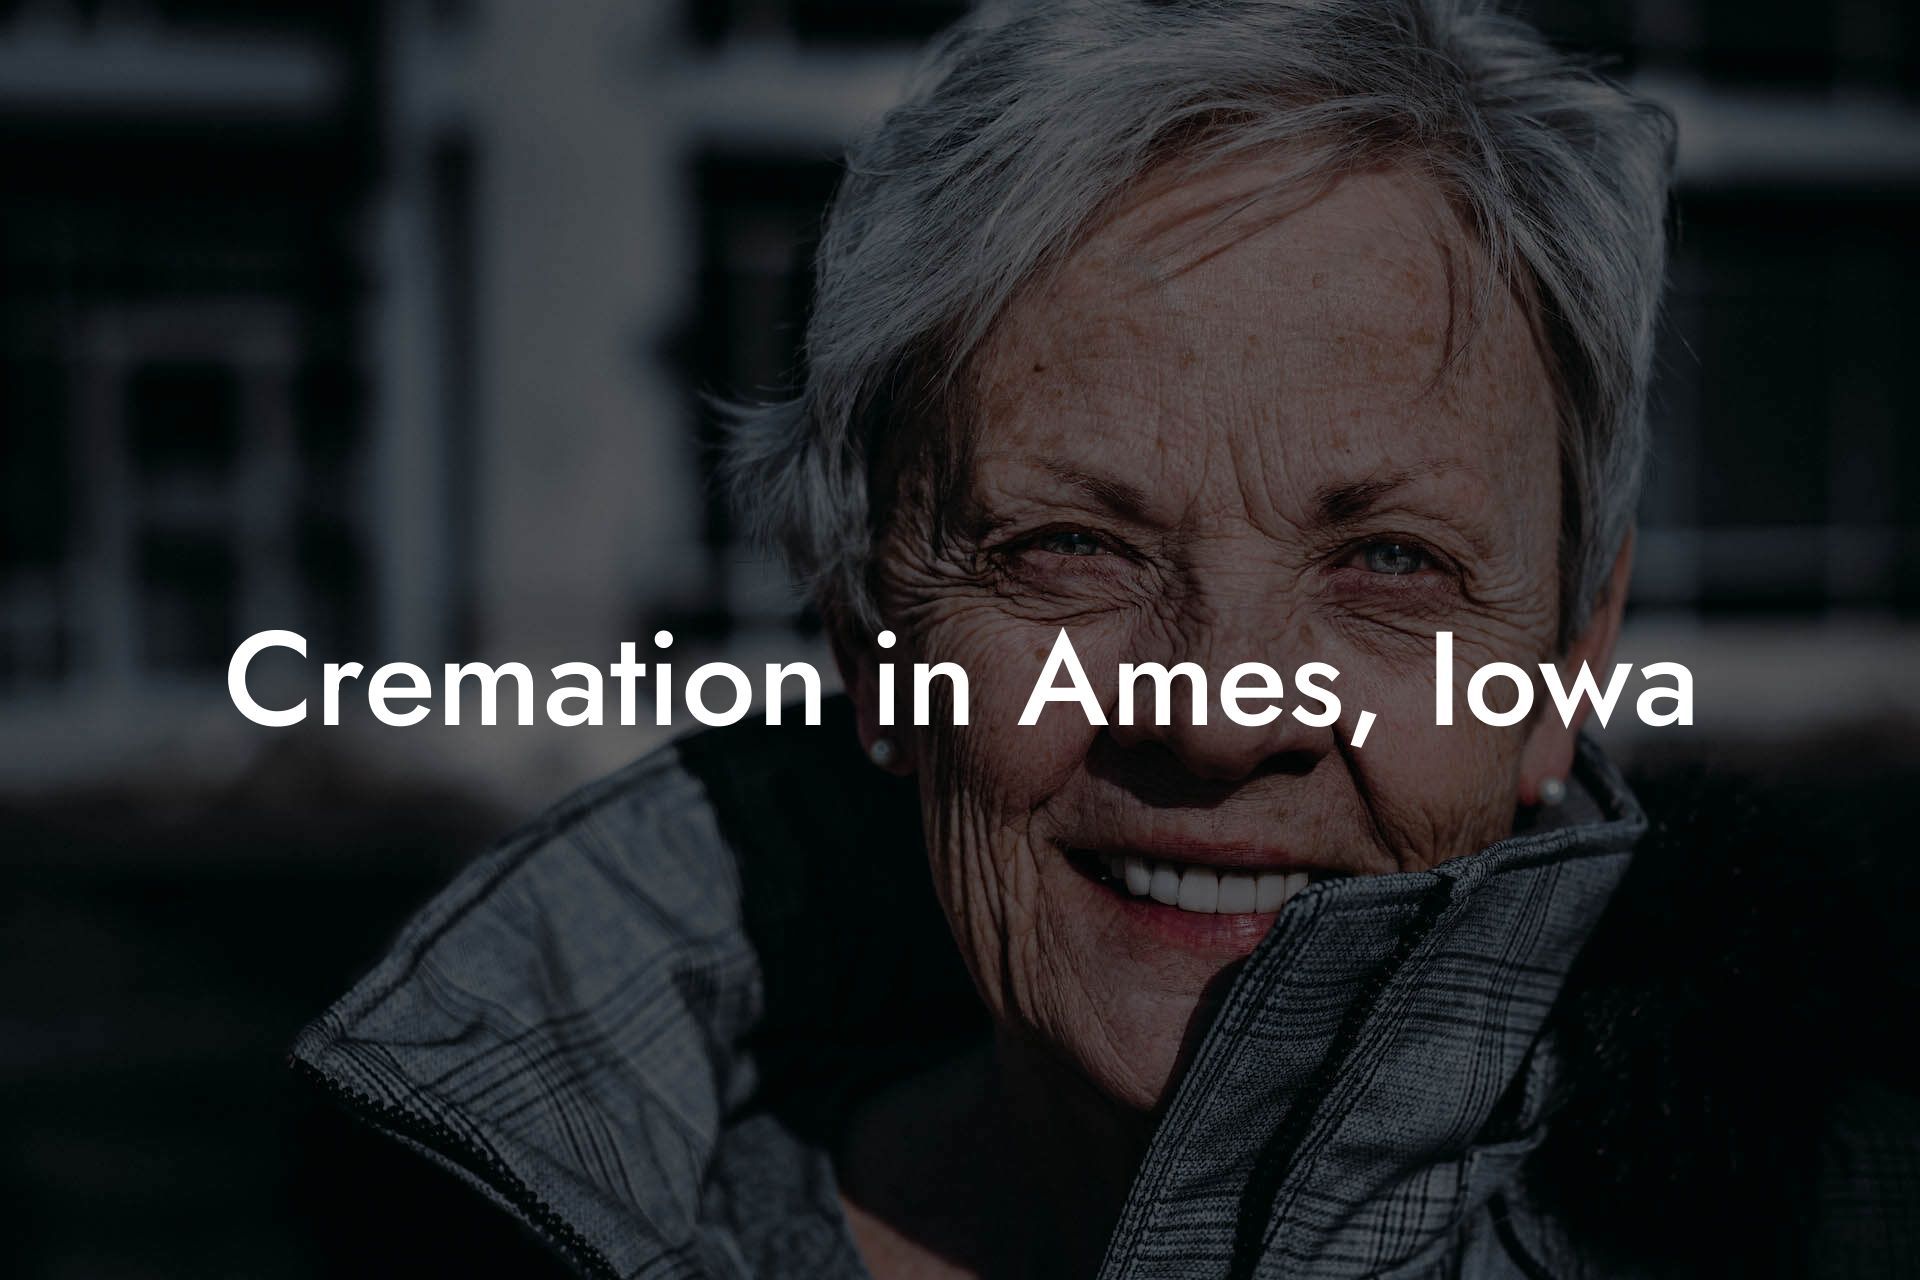 Cremation in Ames, Iowa